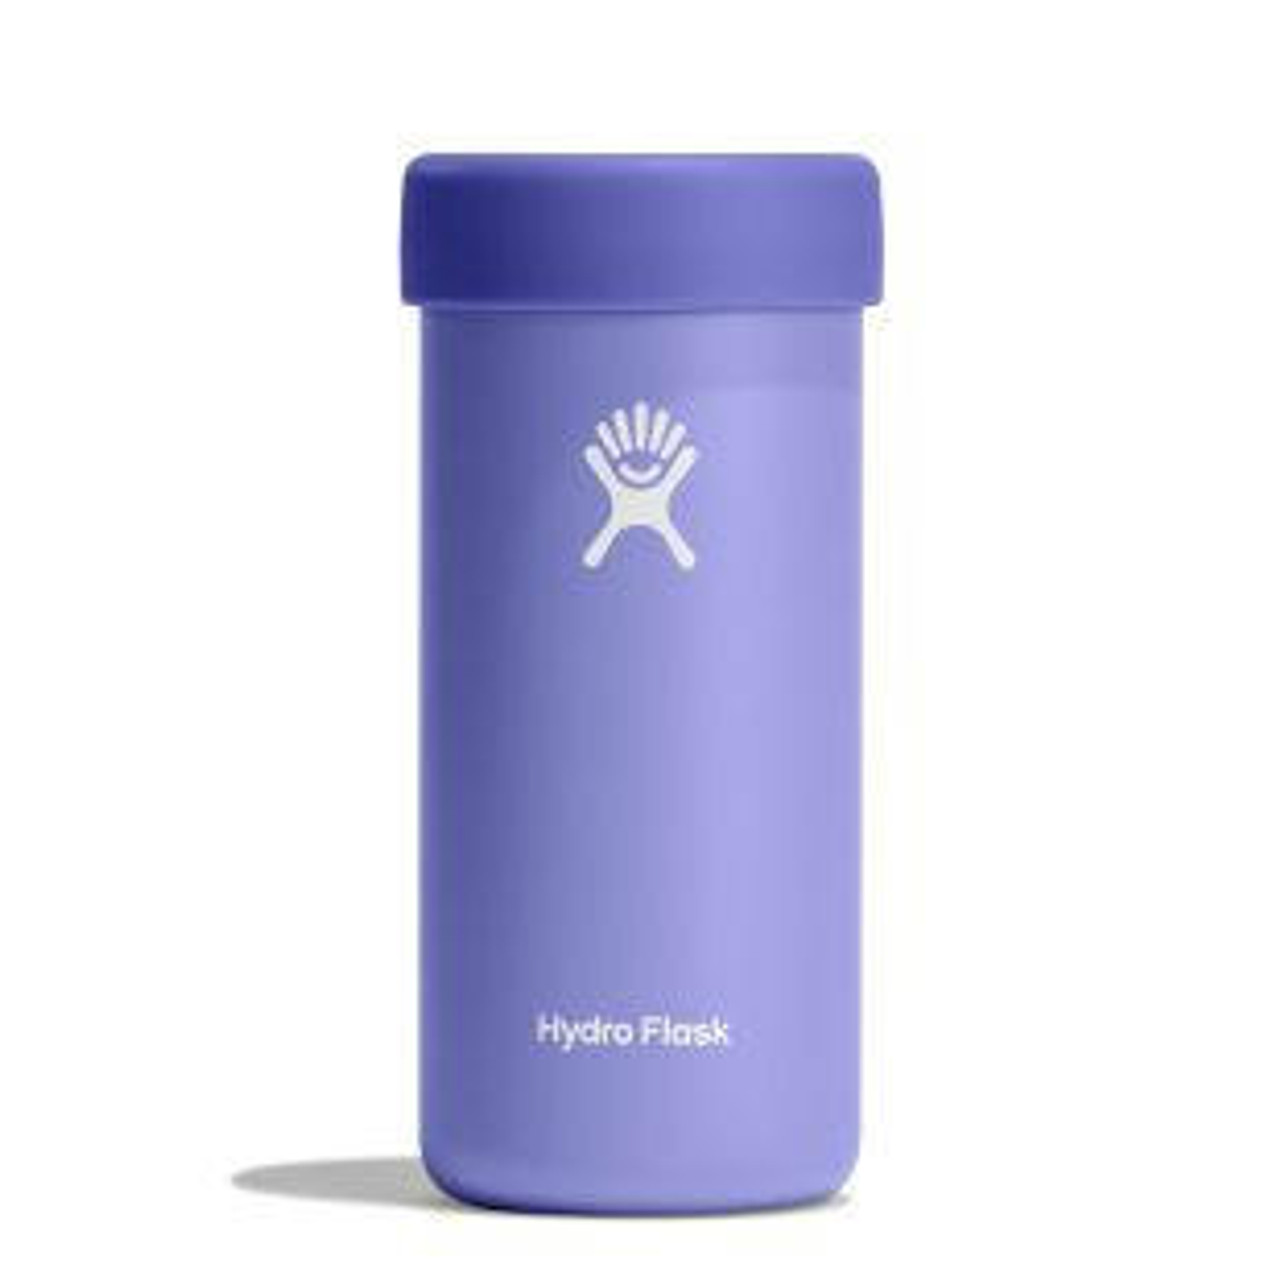 HydroFlask 12oz Cooler Cup